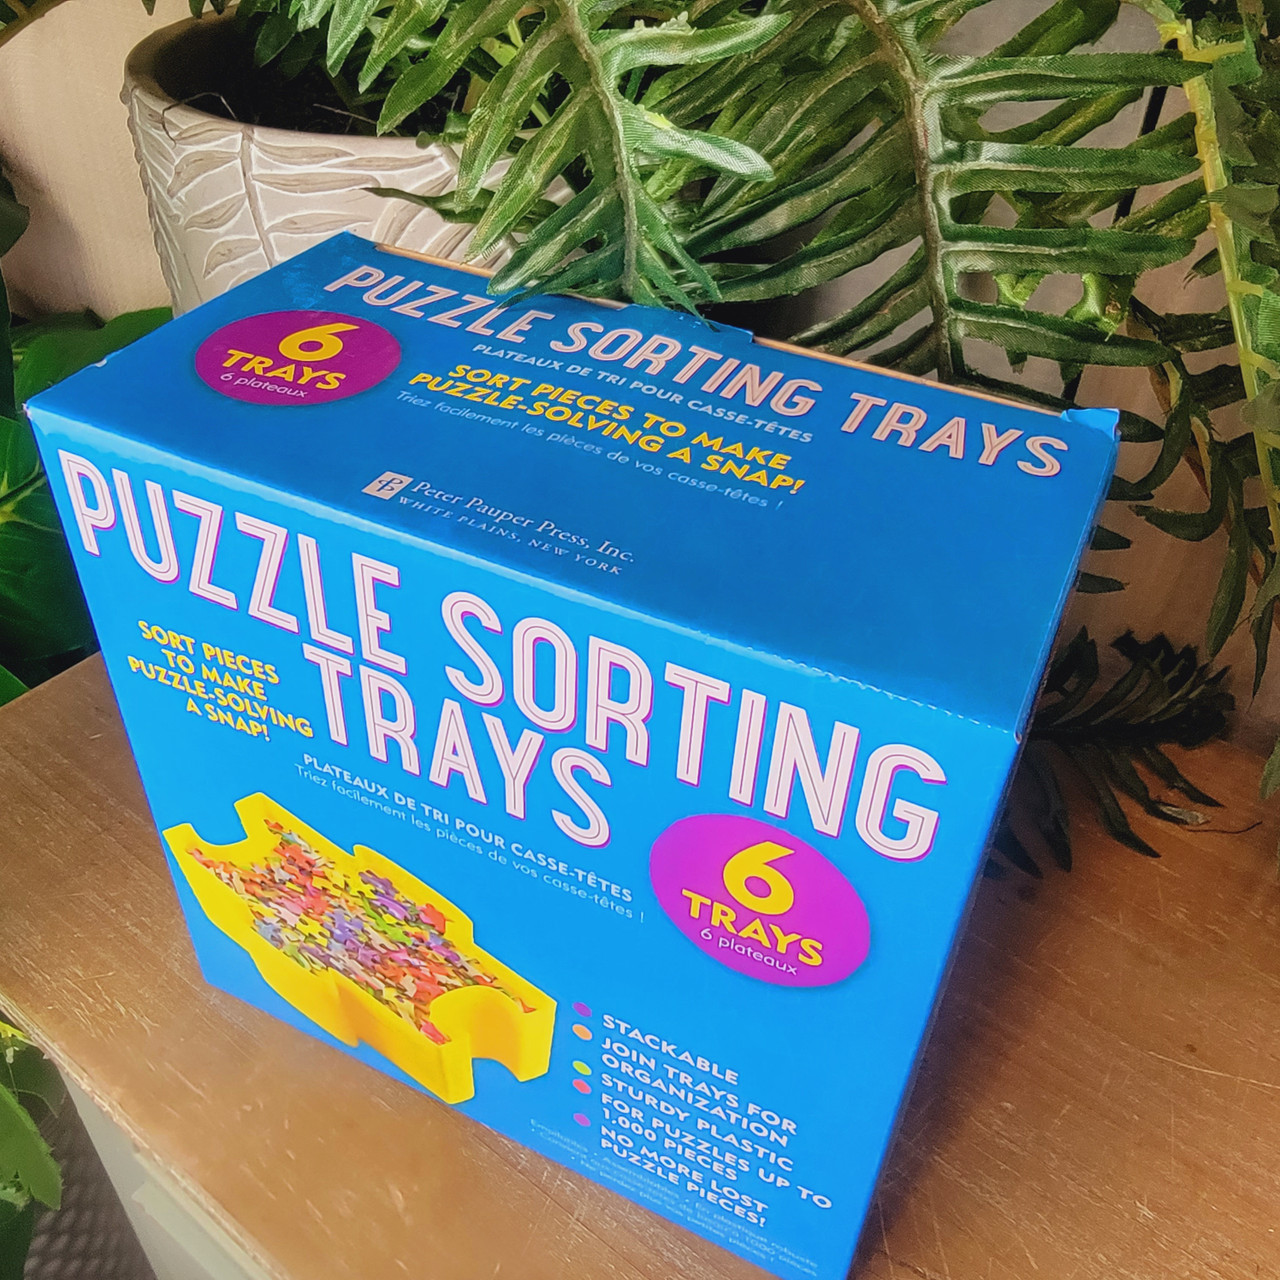  Puzzle Sorting Trays